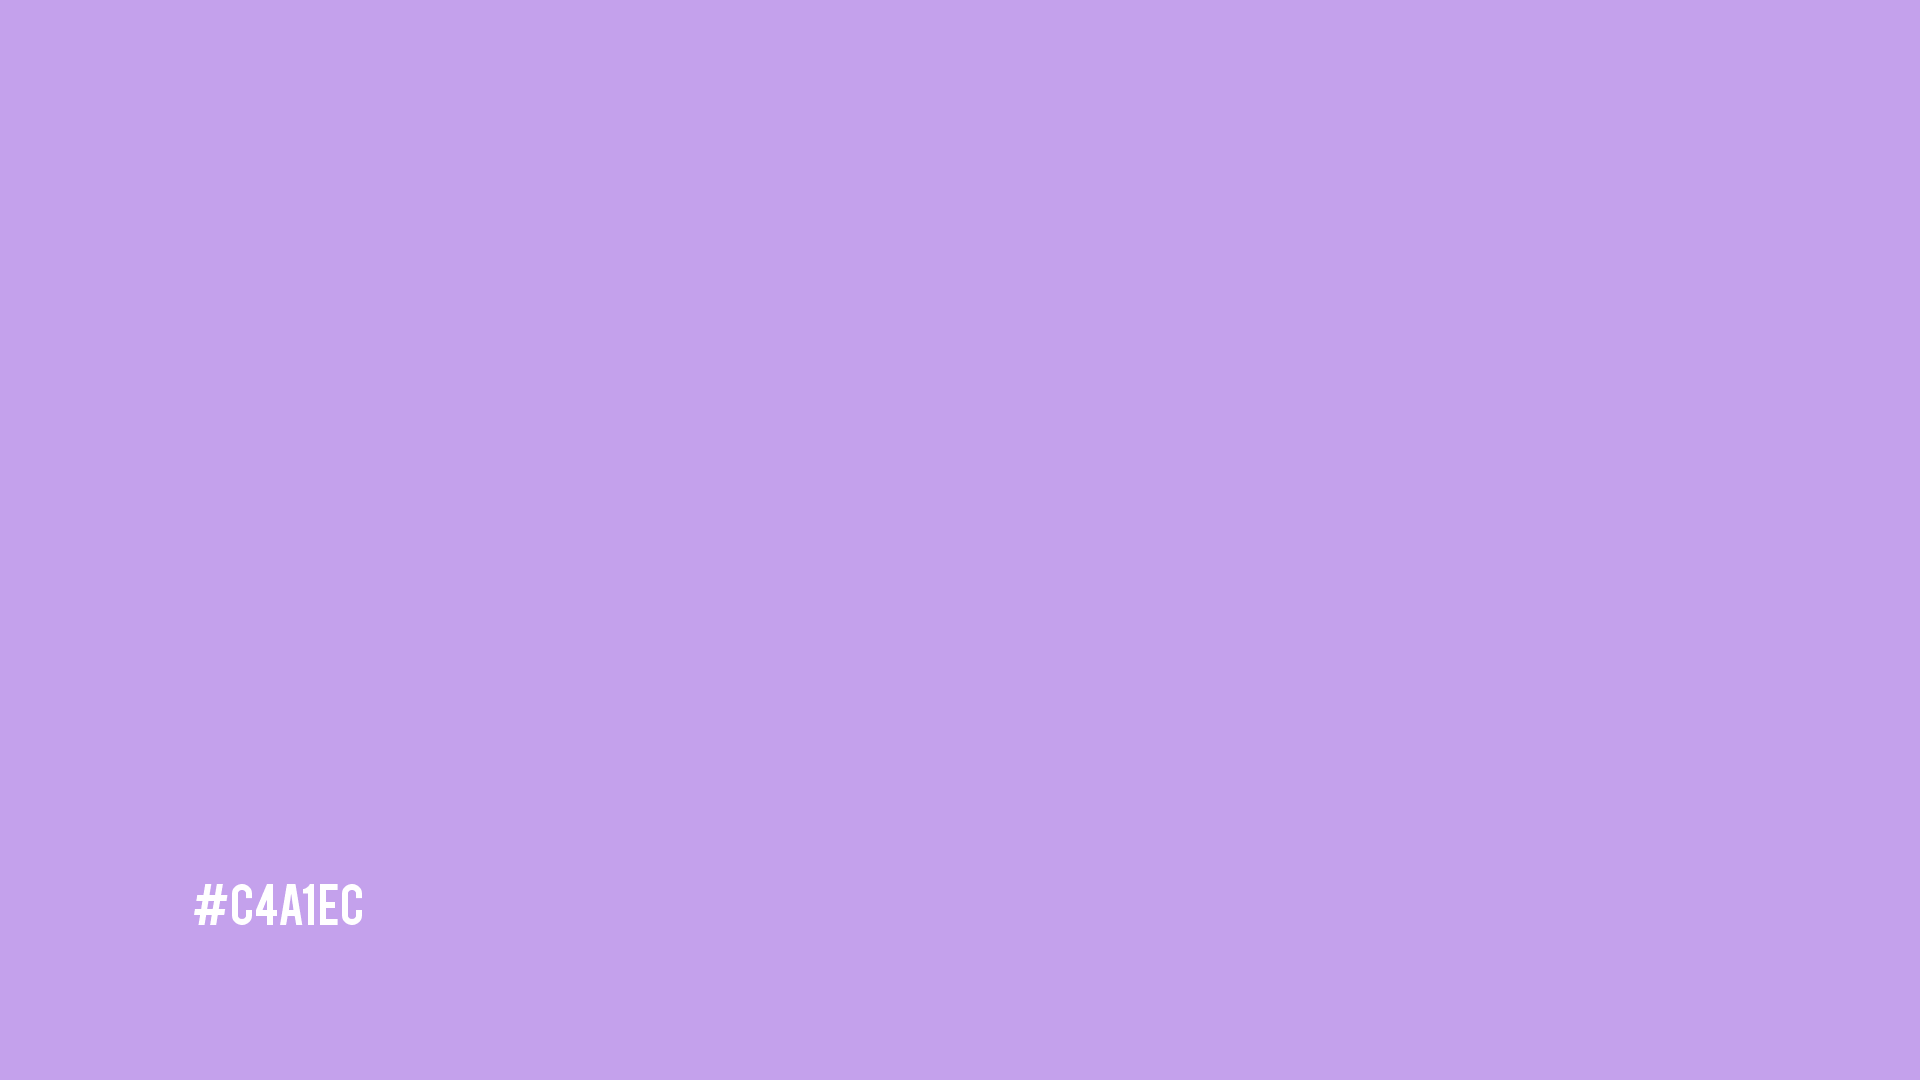 c4a1ec (light violet) info, conversion, color schemes and complementary